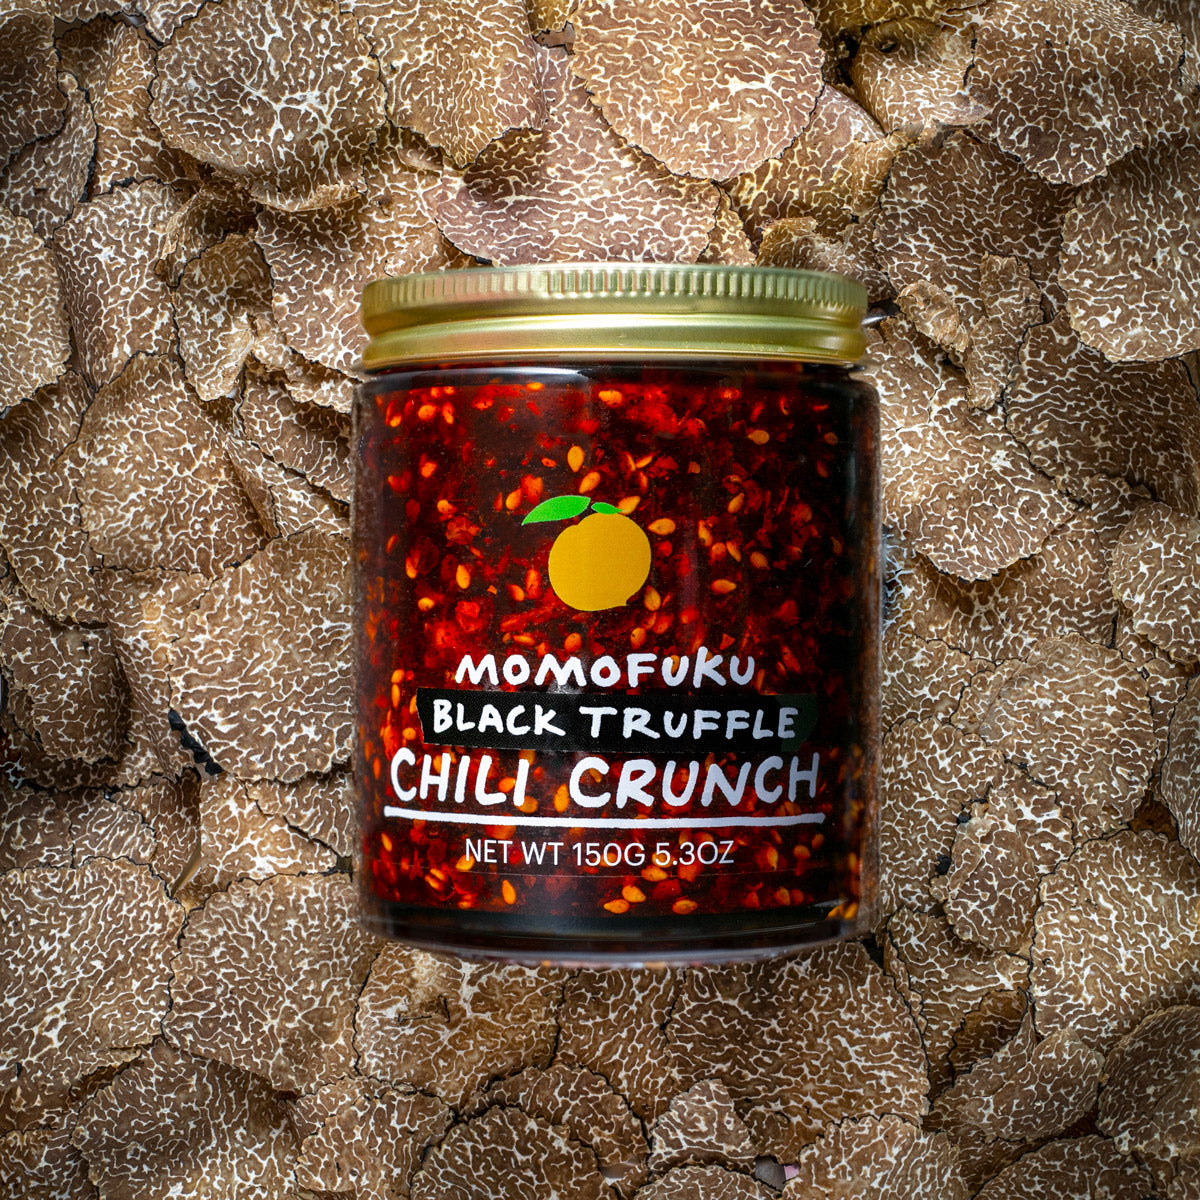 chili crunch jar on a bed of truffles